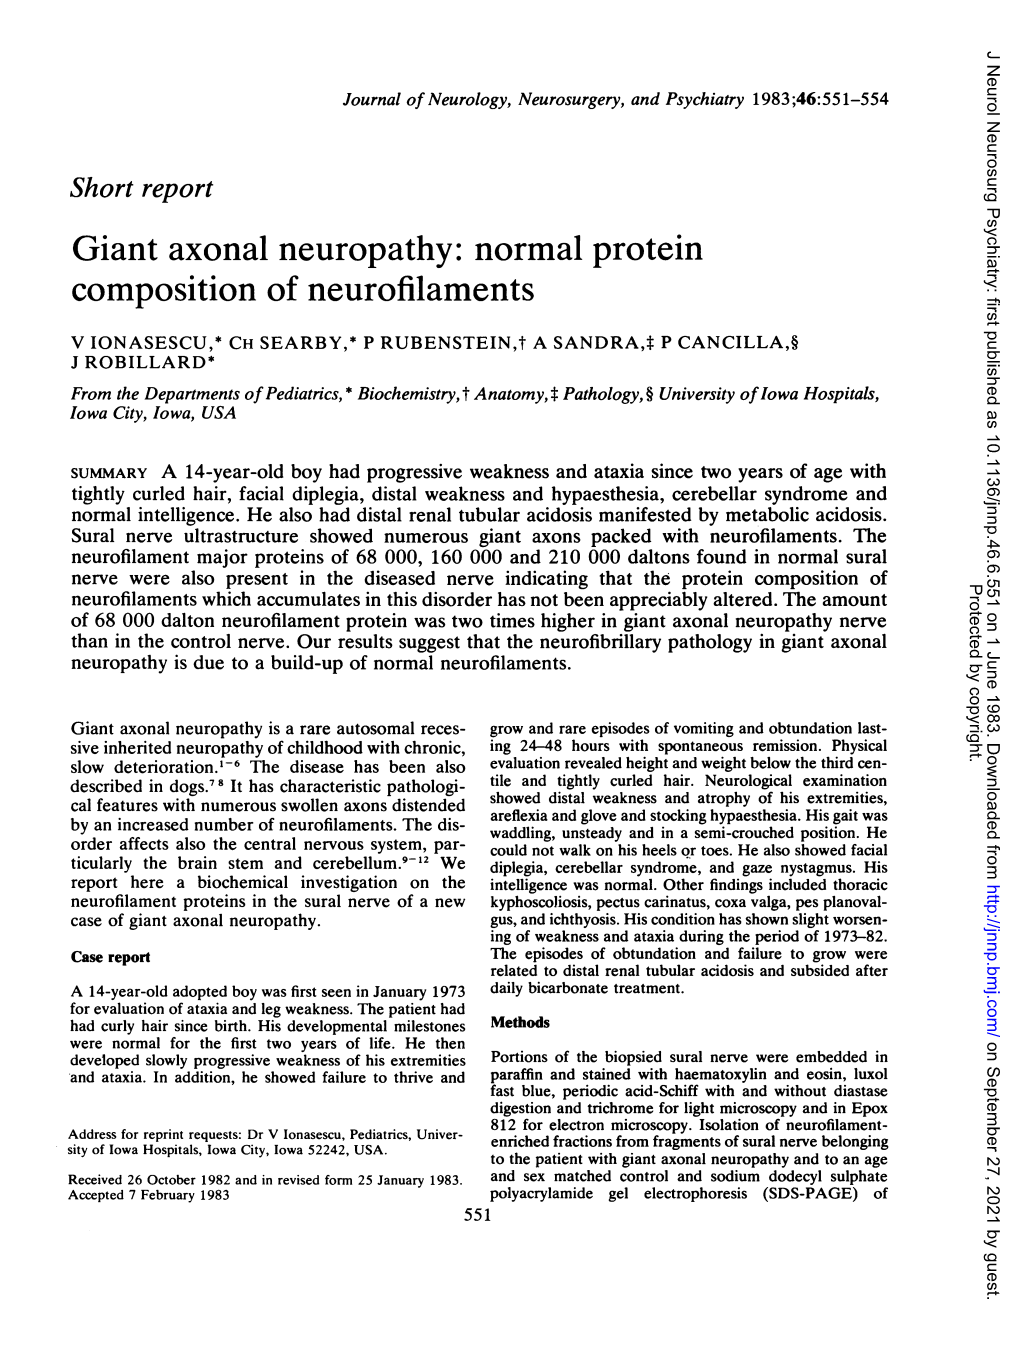 Giant Axonal Neuropathy: Normal Protein Composition of Neurofilaments